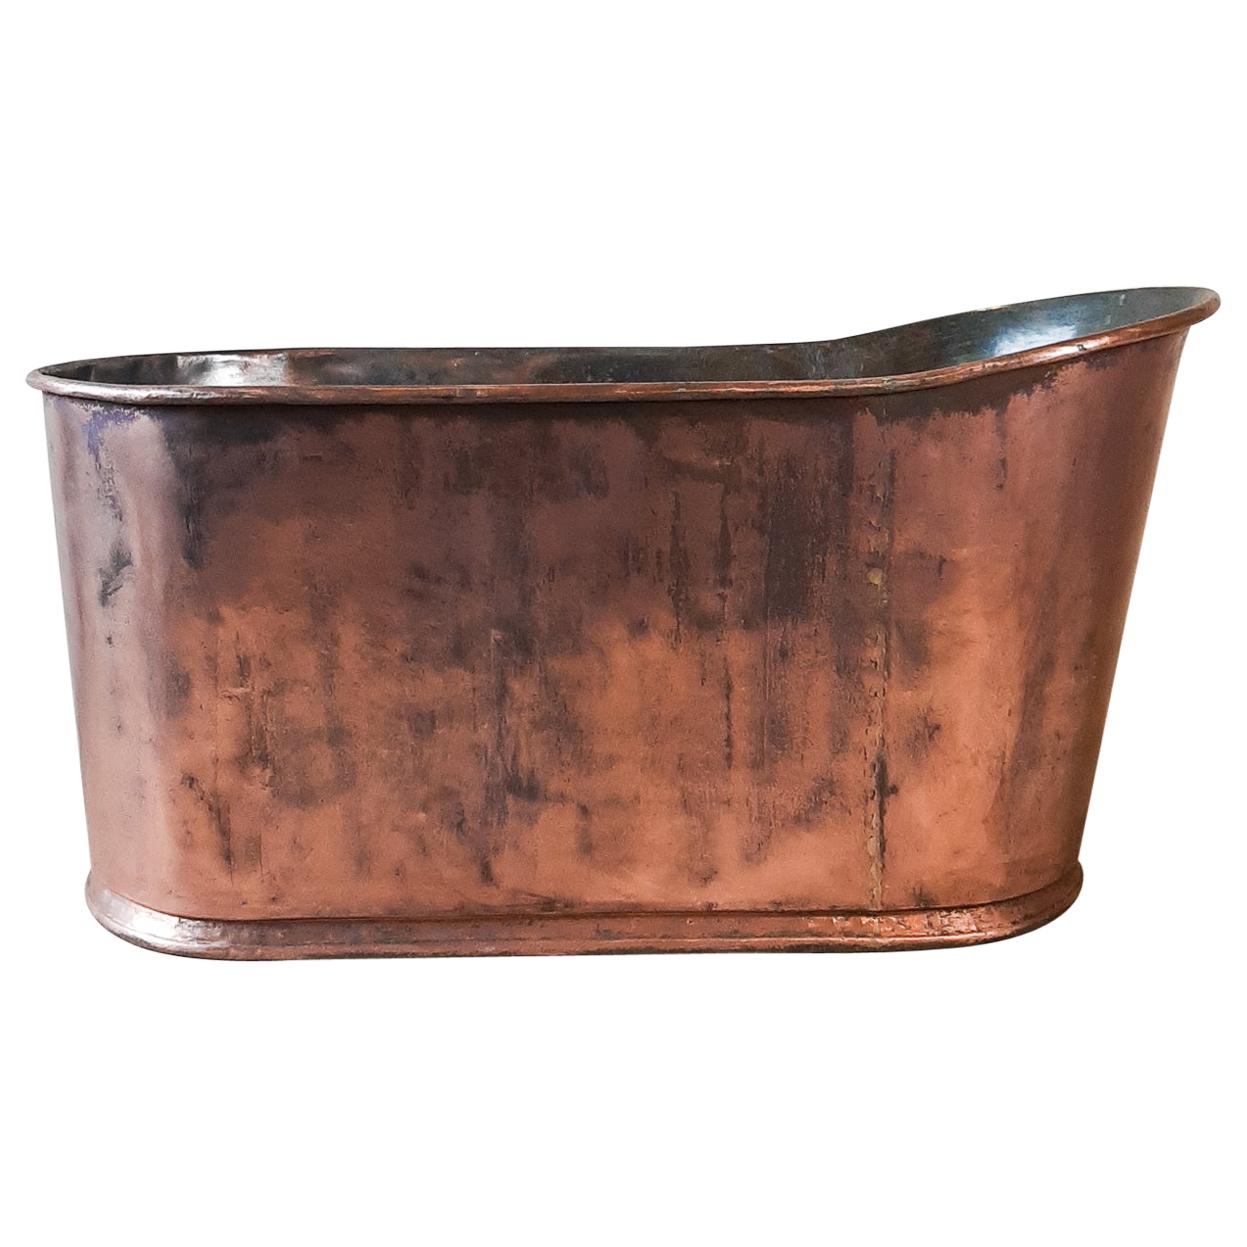 Antique Early 19th Century French Empire Copper Bathtub